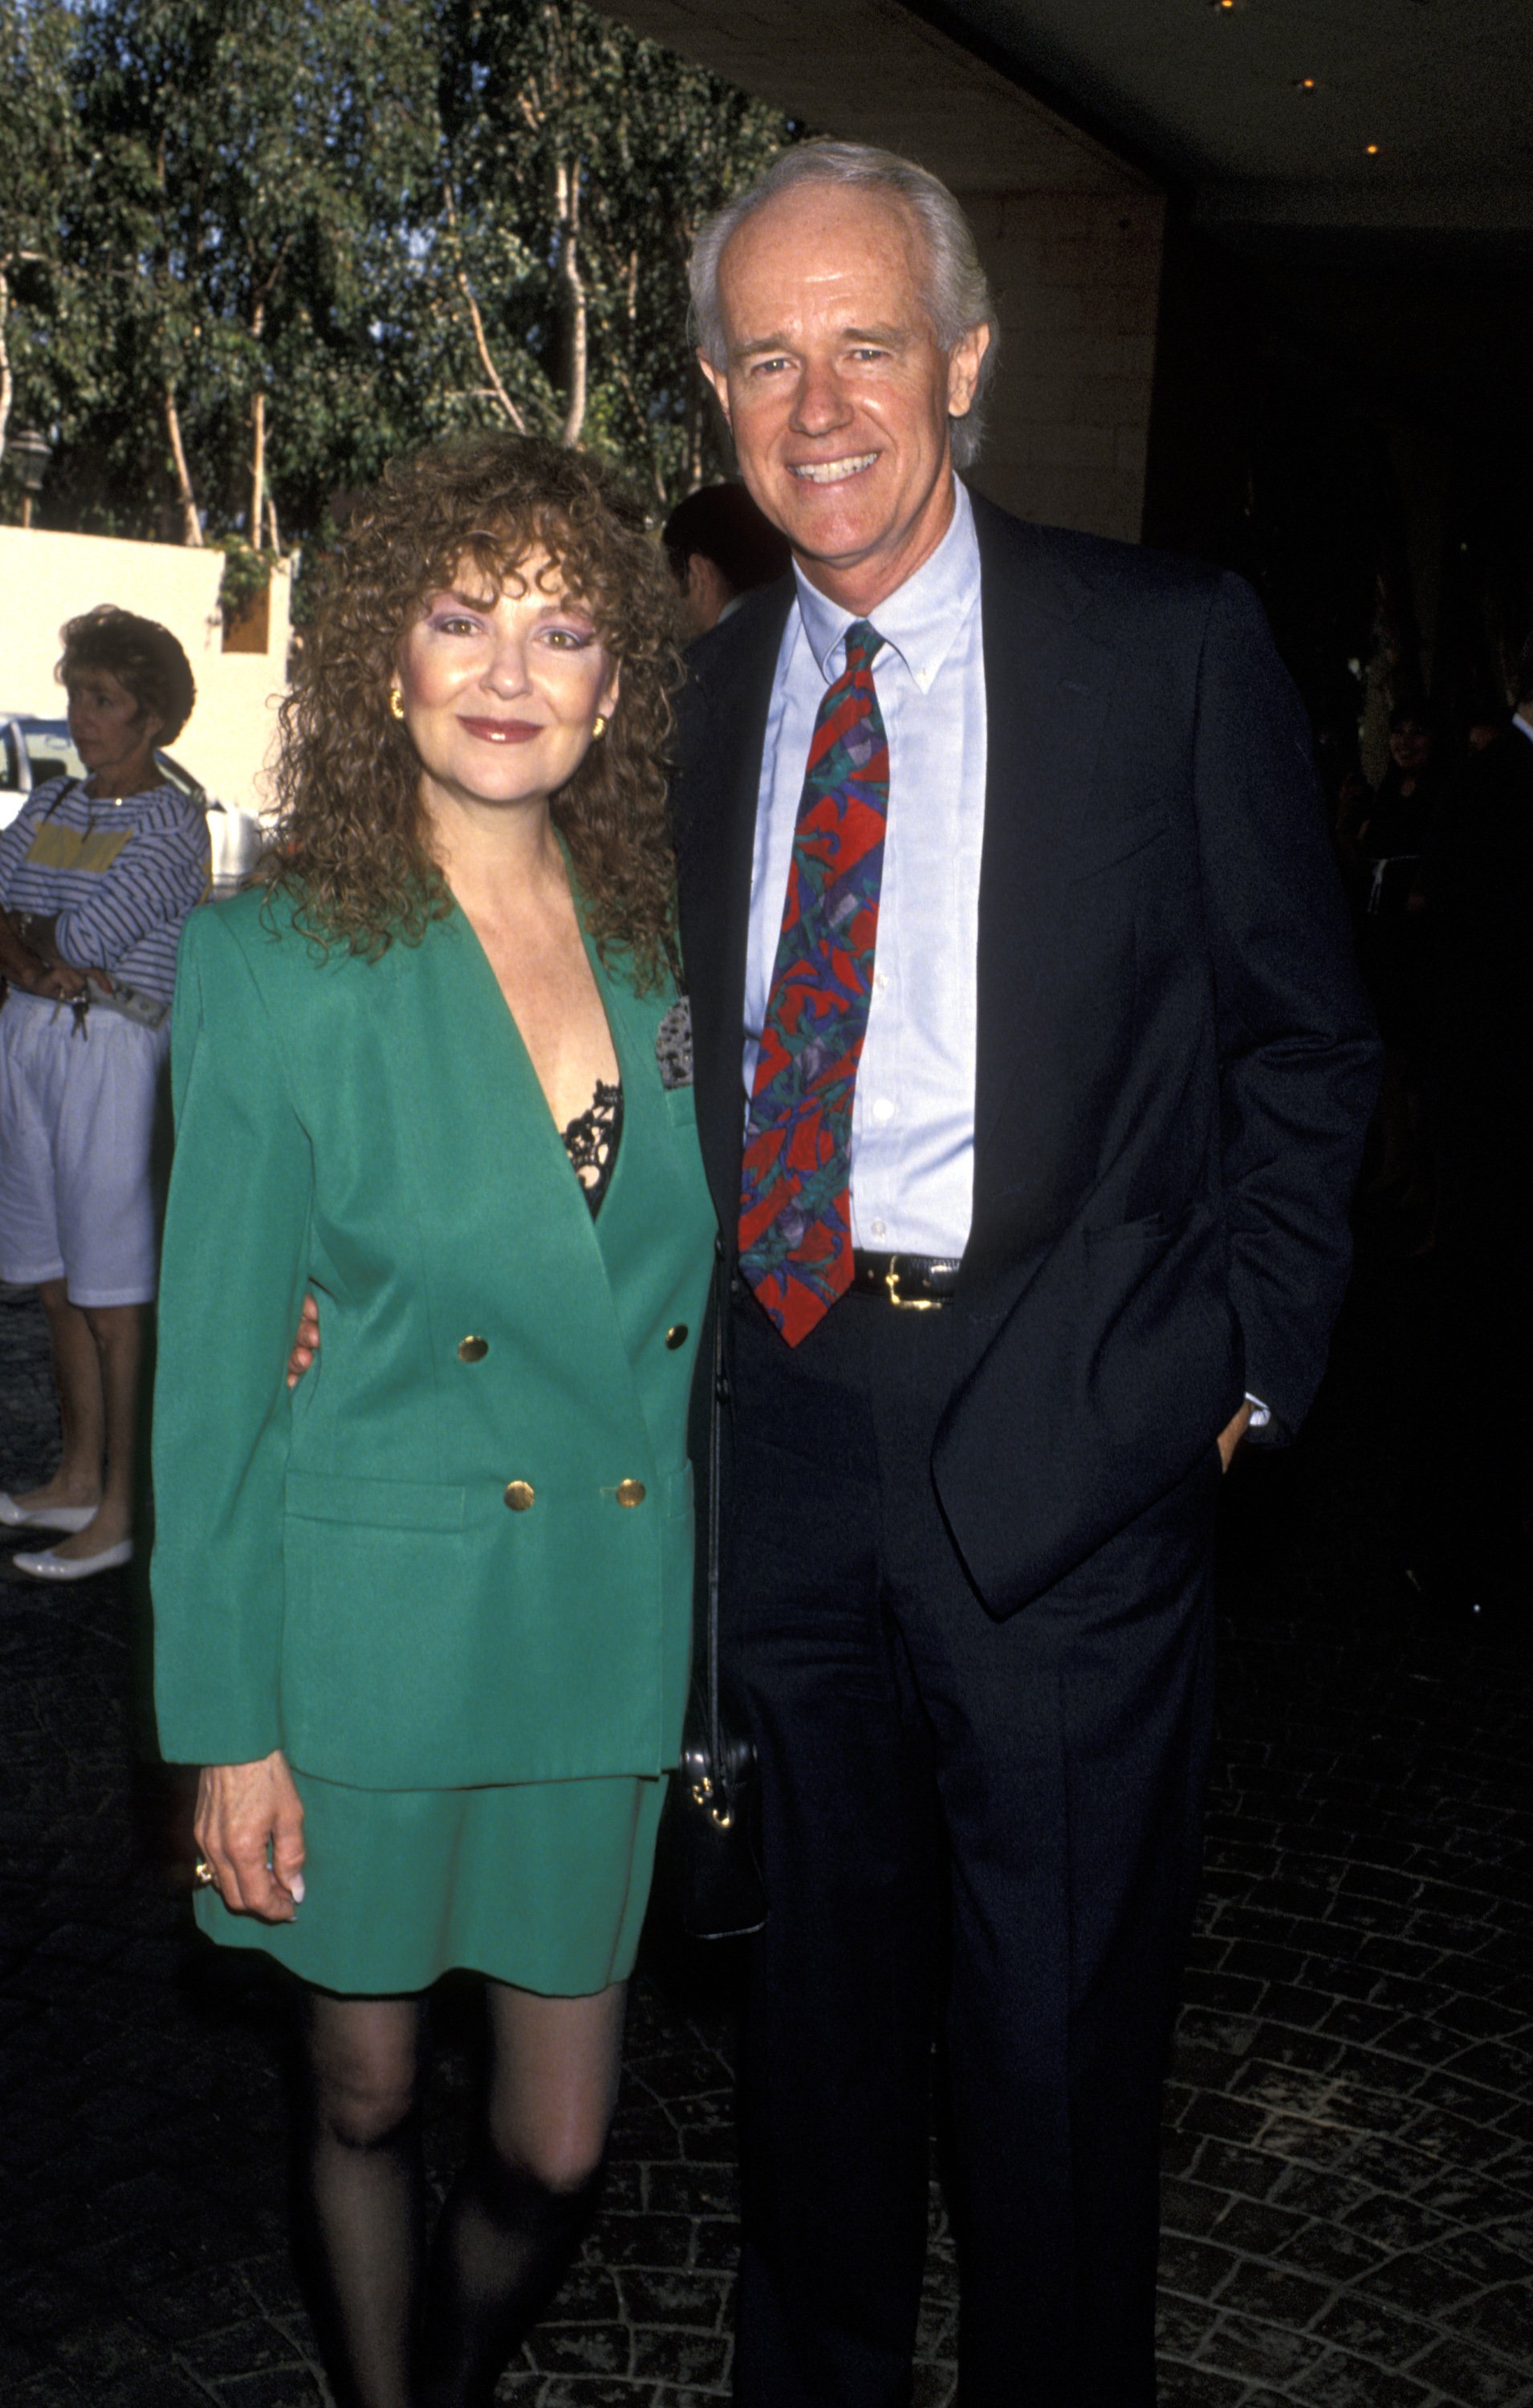 Shelley Fabares and Mike Farrell attend the Women In Film Emmy Nominee Luncheon at the Bel Age Hotel on September 10, 1994 in Wes Hollywood, California. | Source: Getty Images